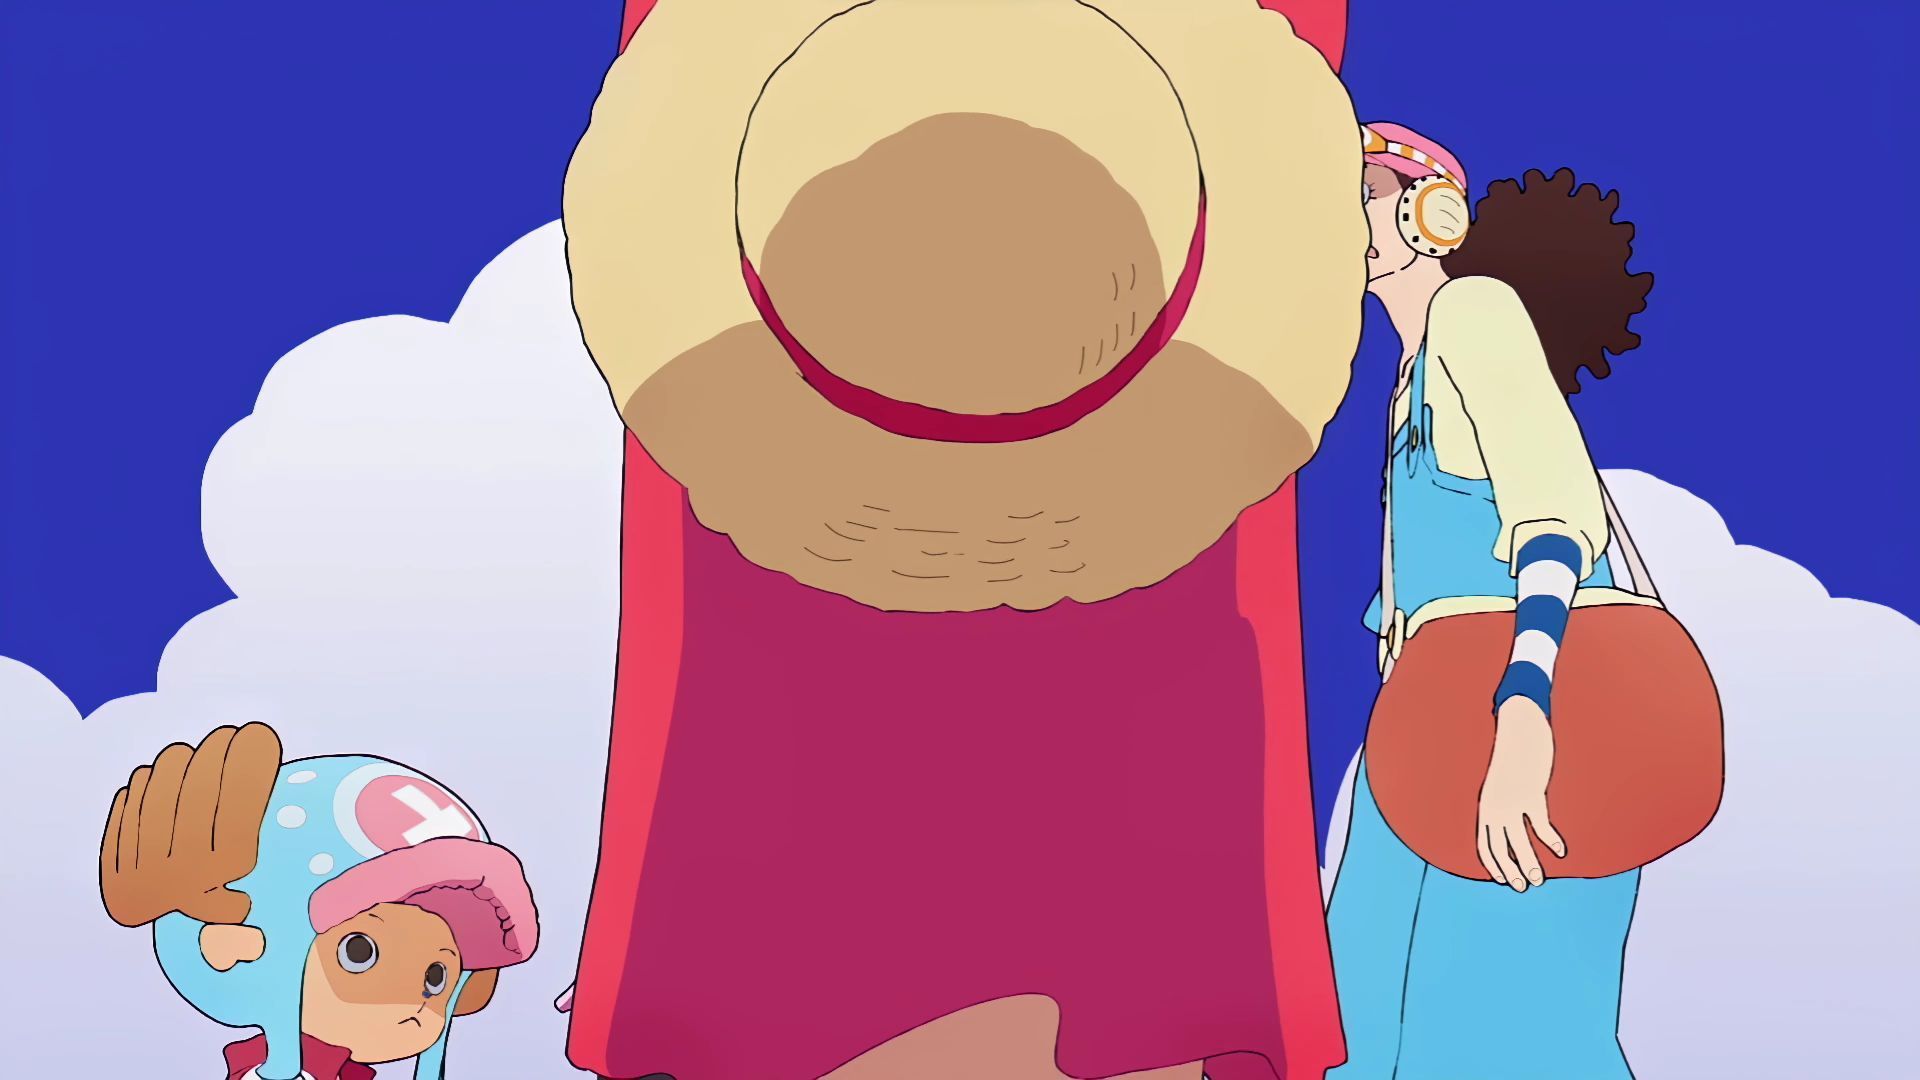 Luffy as seen at the end of the opening (Image via Toei Animation, One Piece)